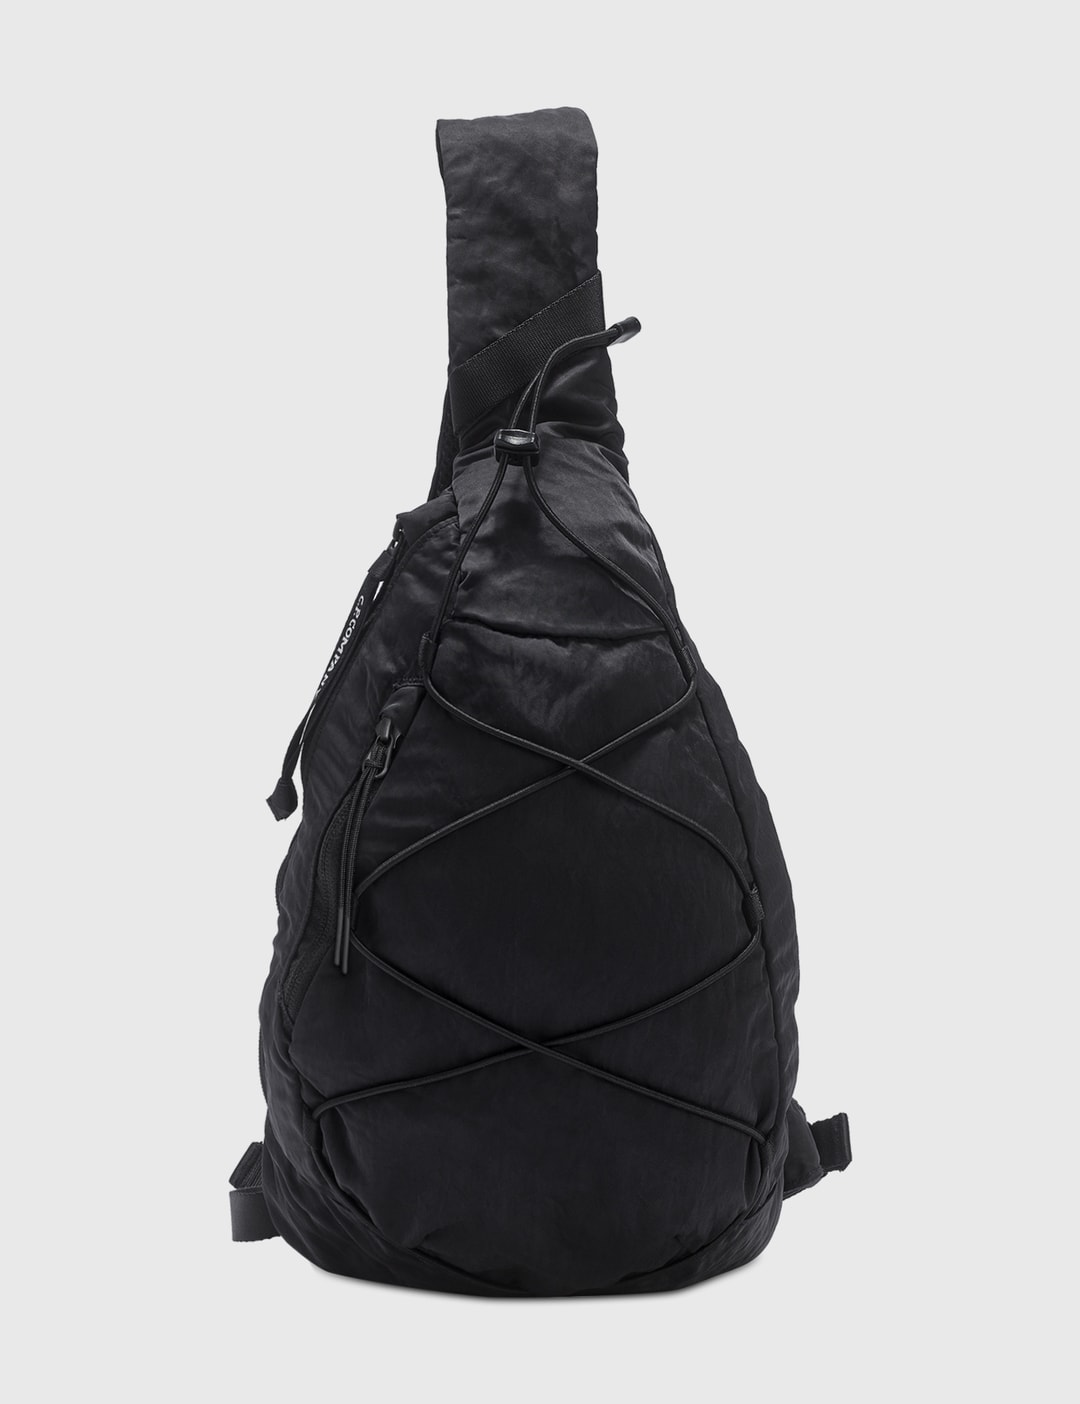 C.P. Company - Crossbody Bag | HBX - Globally Curated Fashion and ...